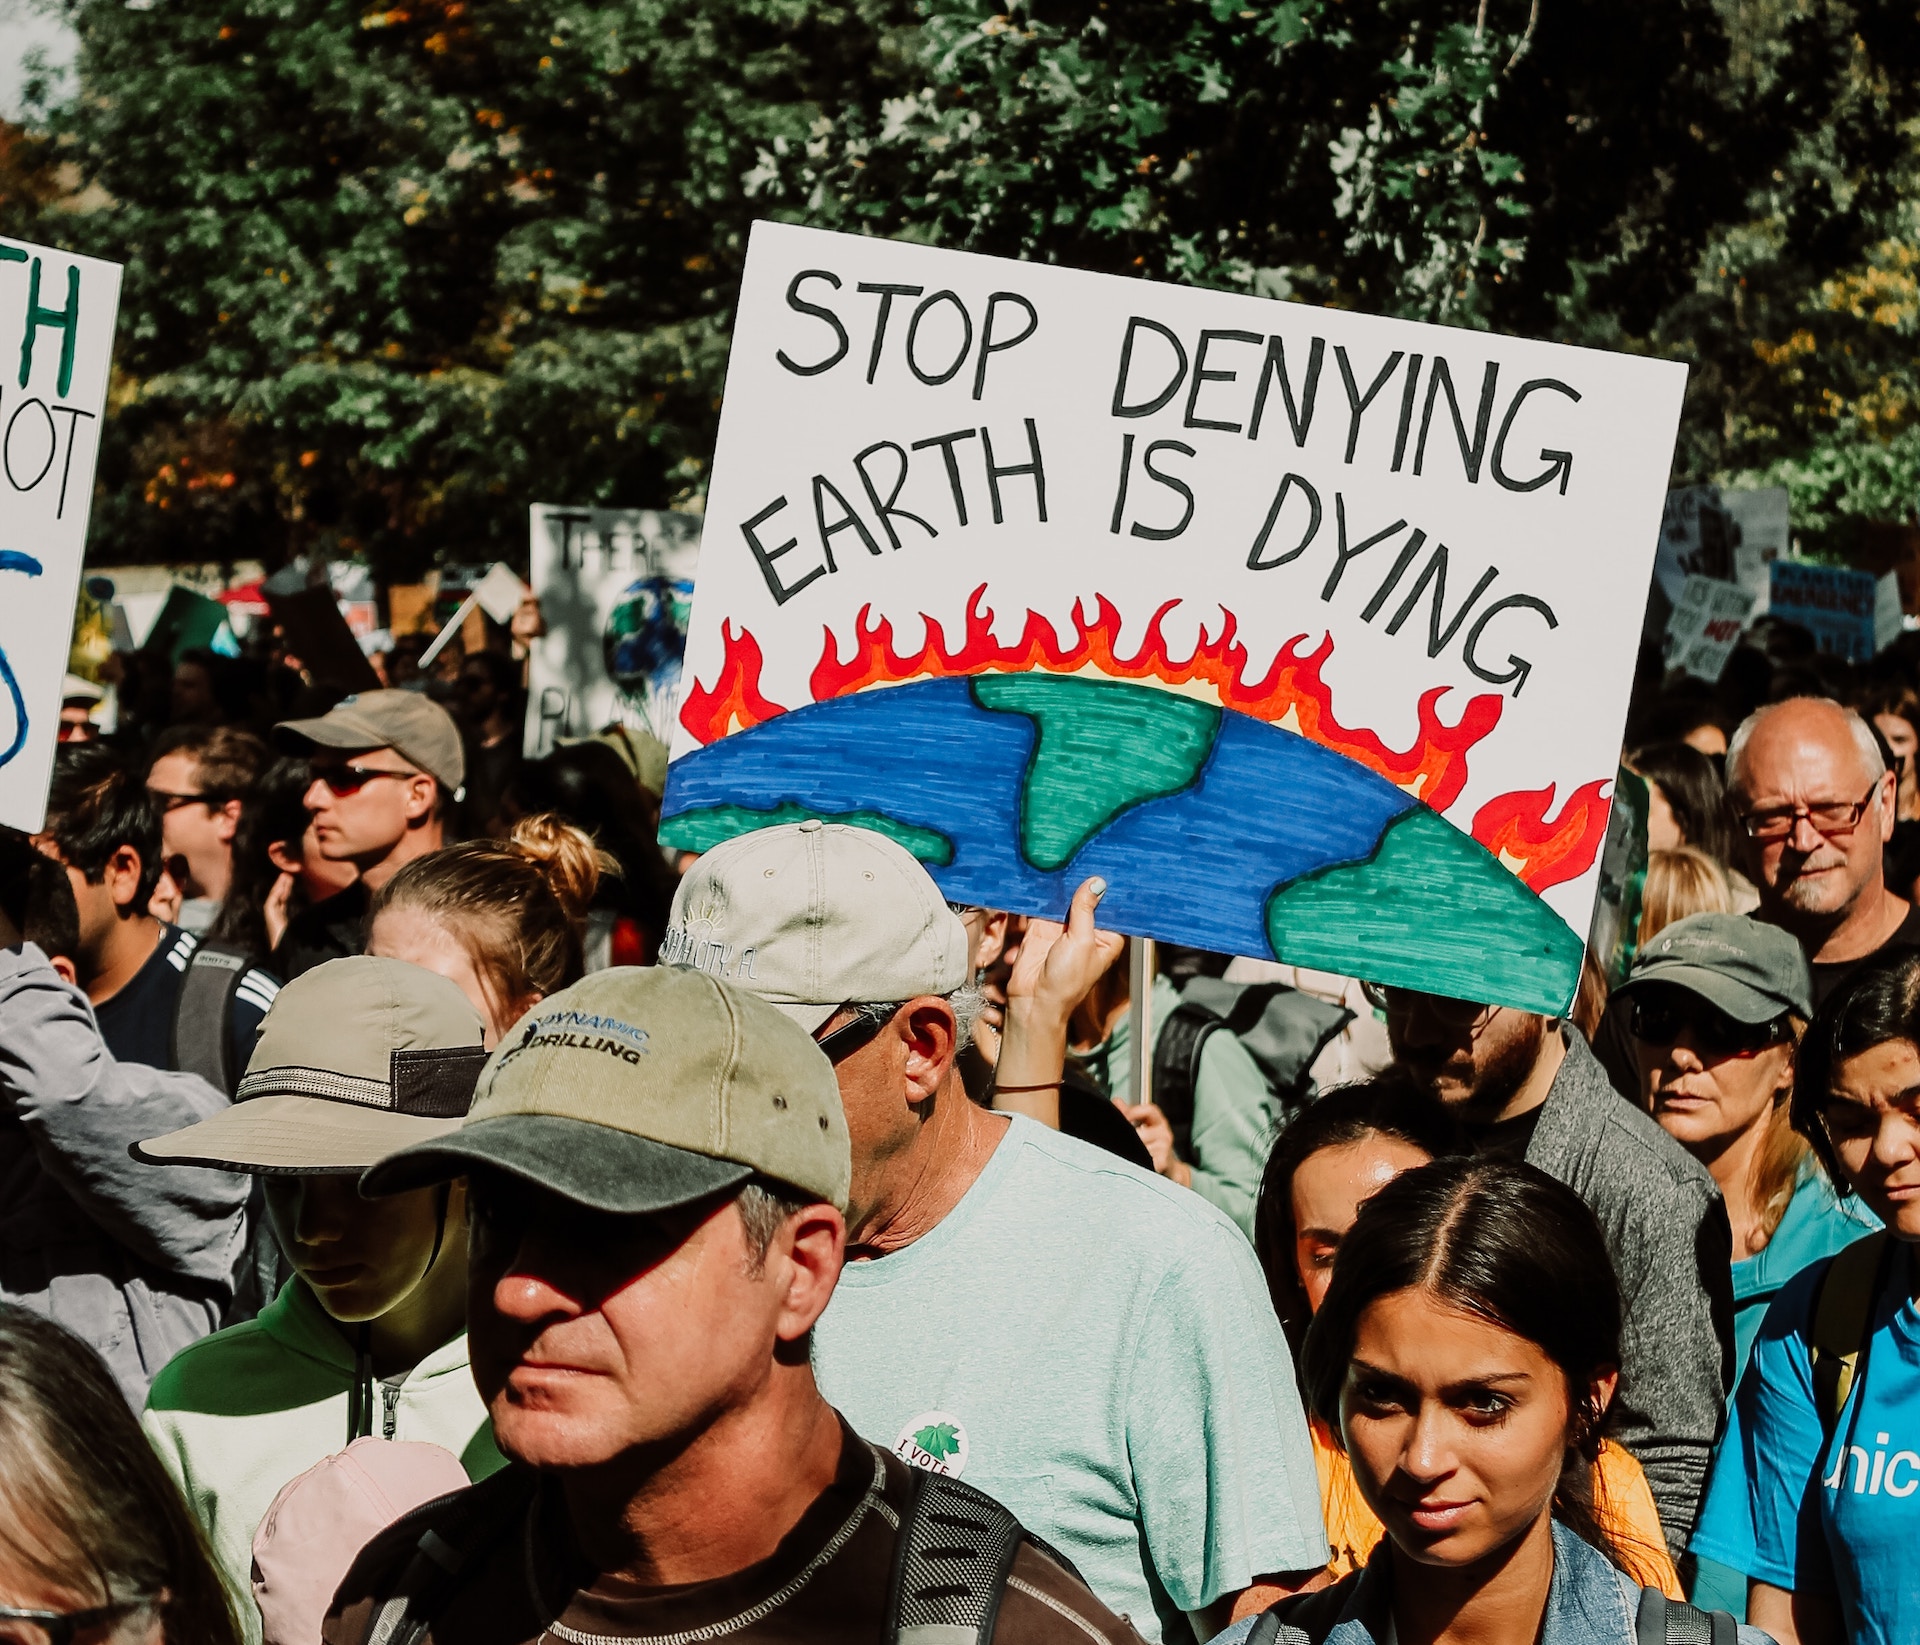 People standing at a climate change protest with one person holding up a sign that says "stop denying earth is dying" to combat climate misinformation